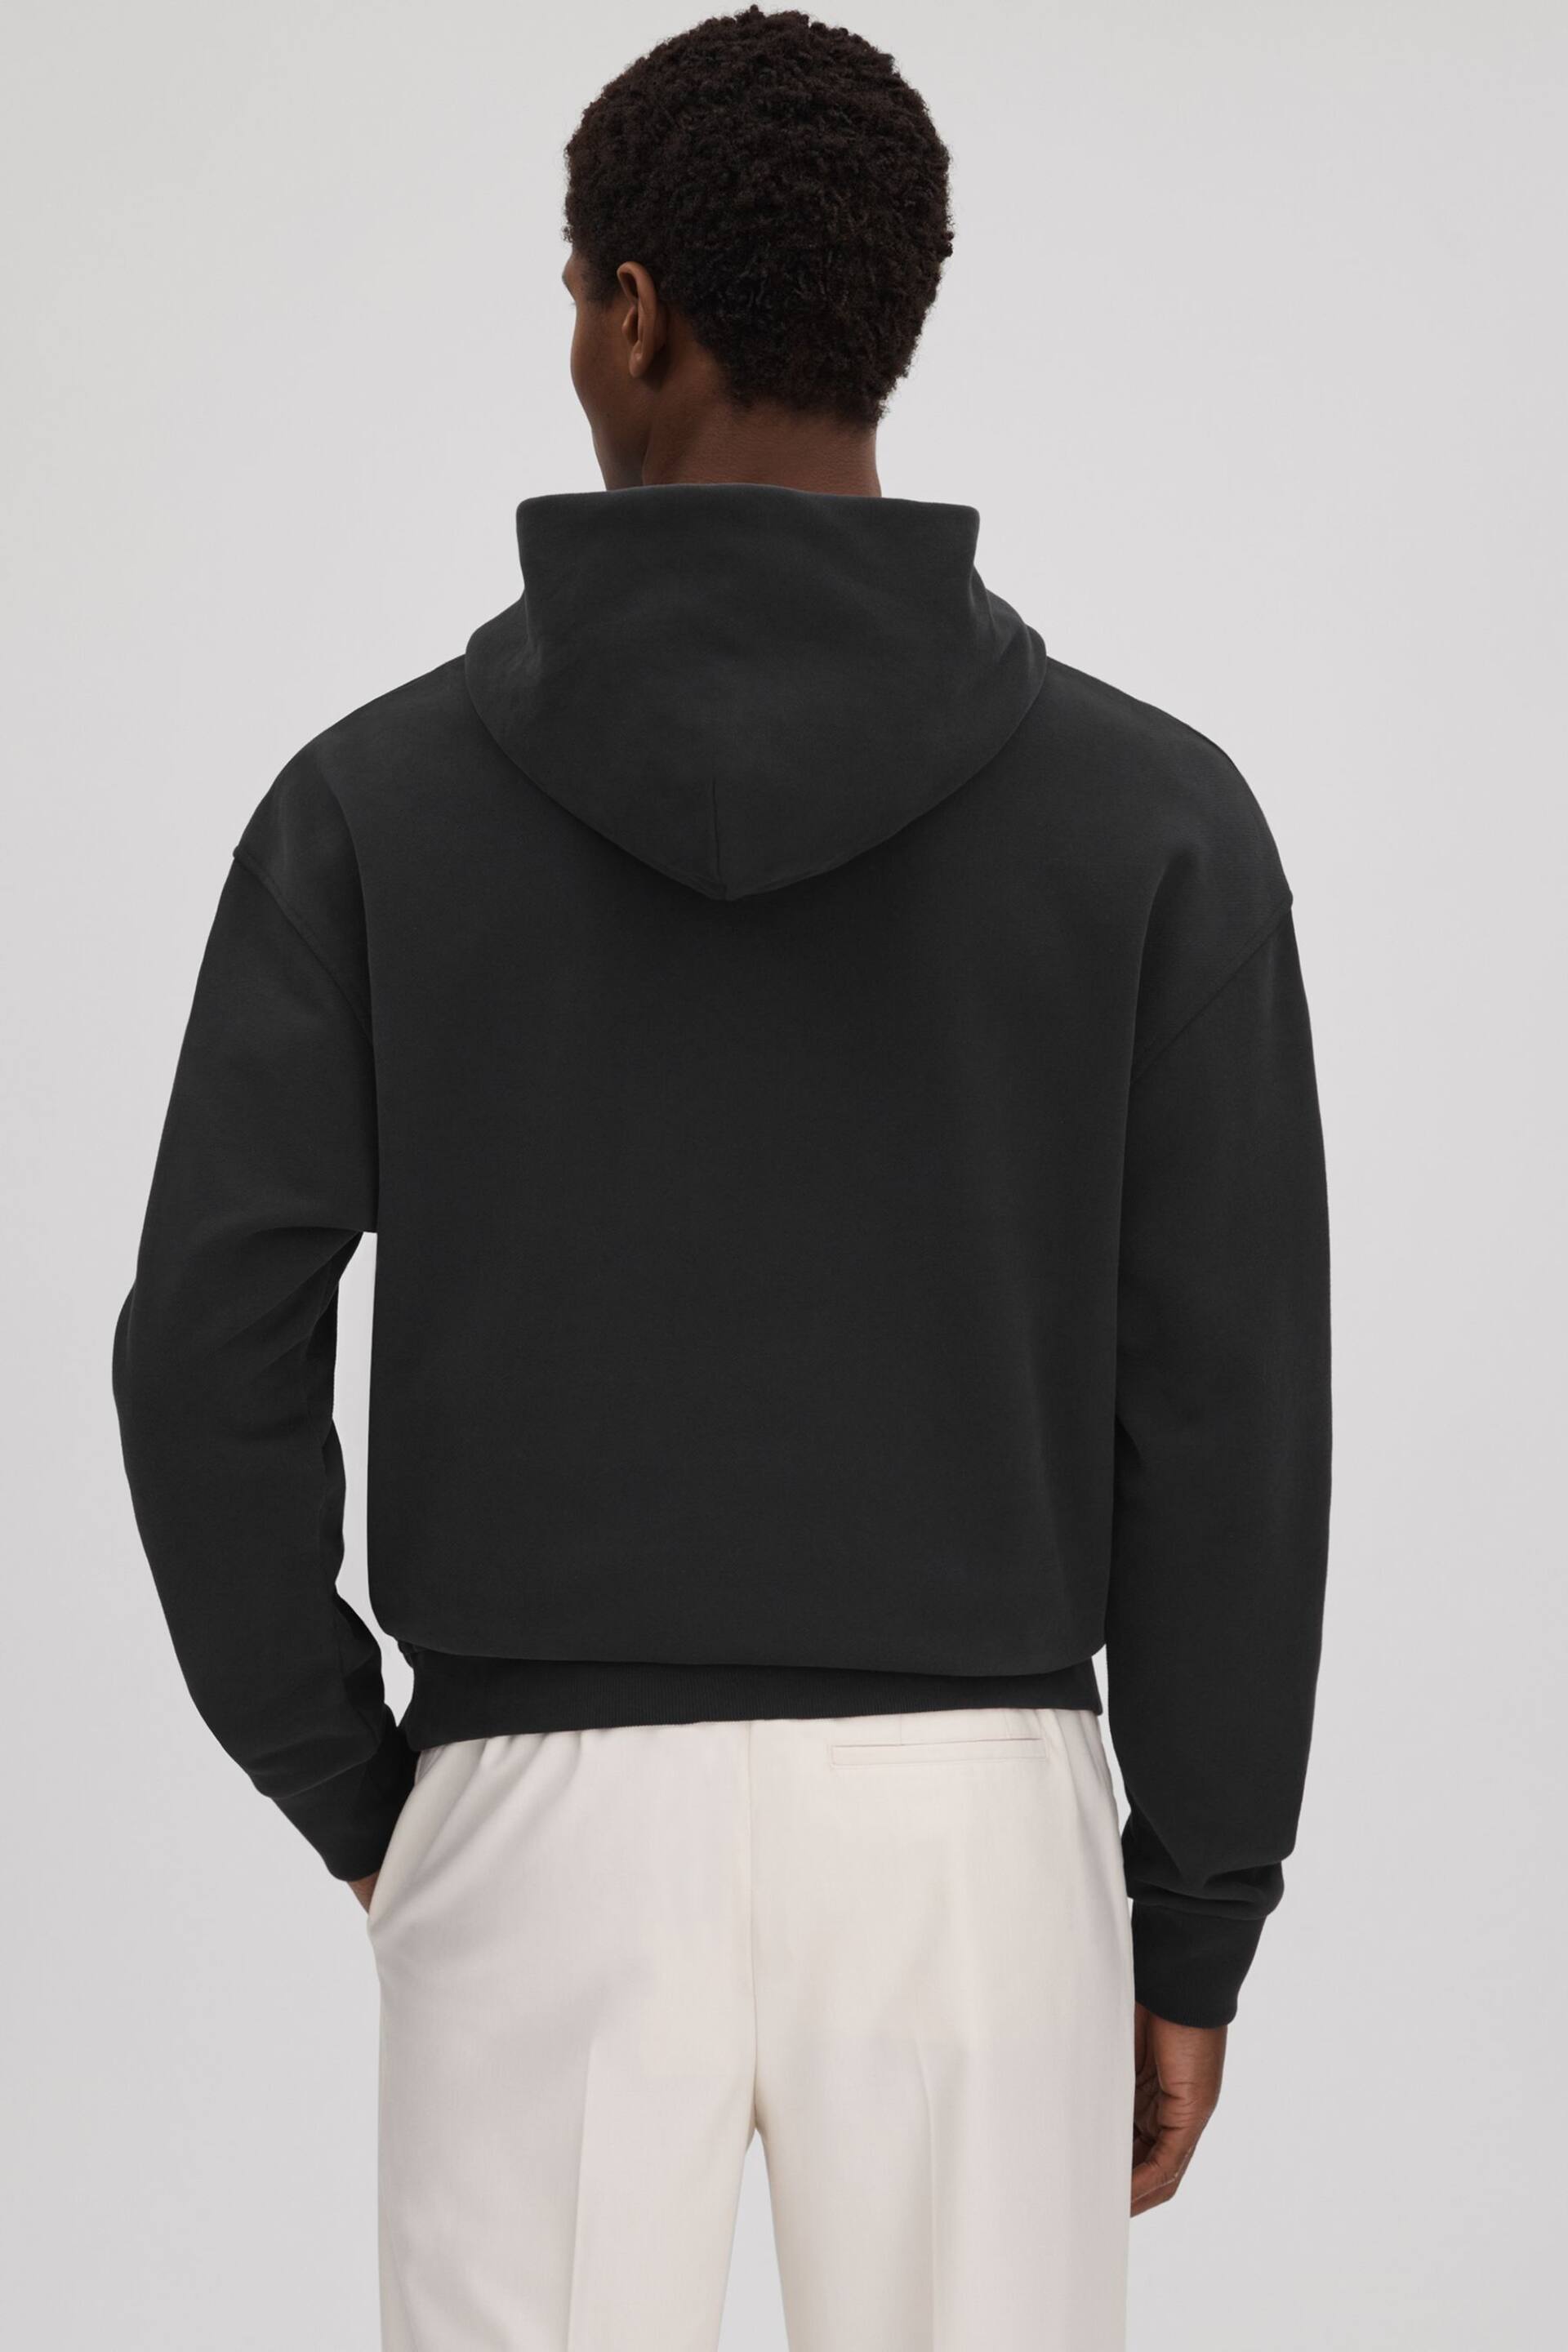 Reiss Washed Black Alexander Casual Fit Cotton Hoodie - Image 5 of 5